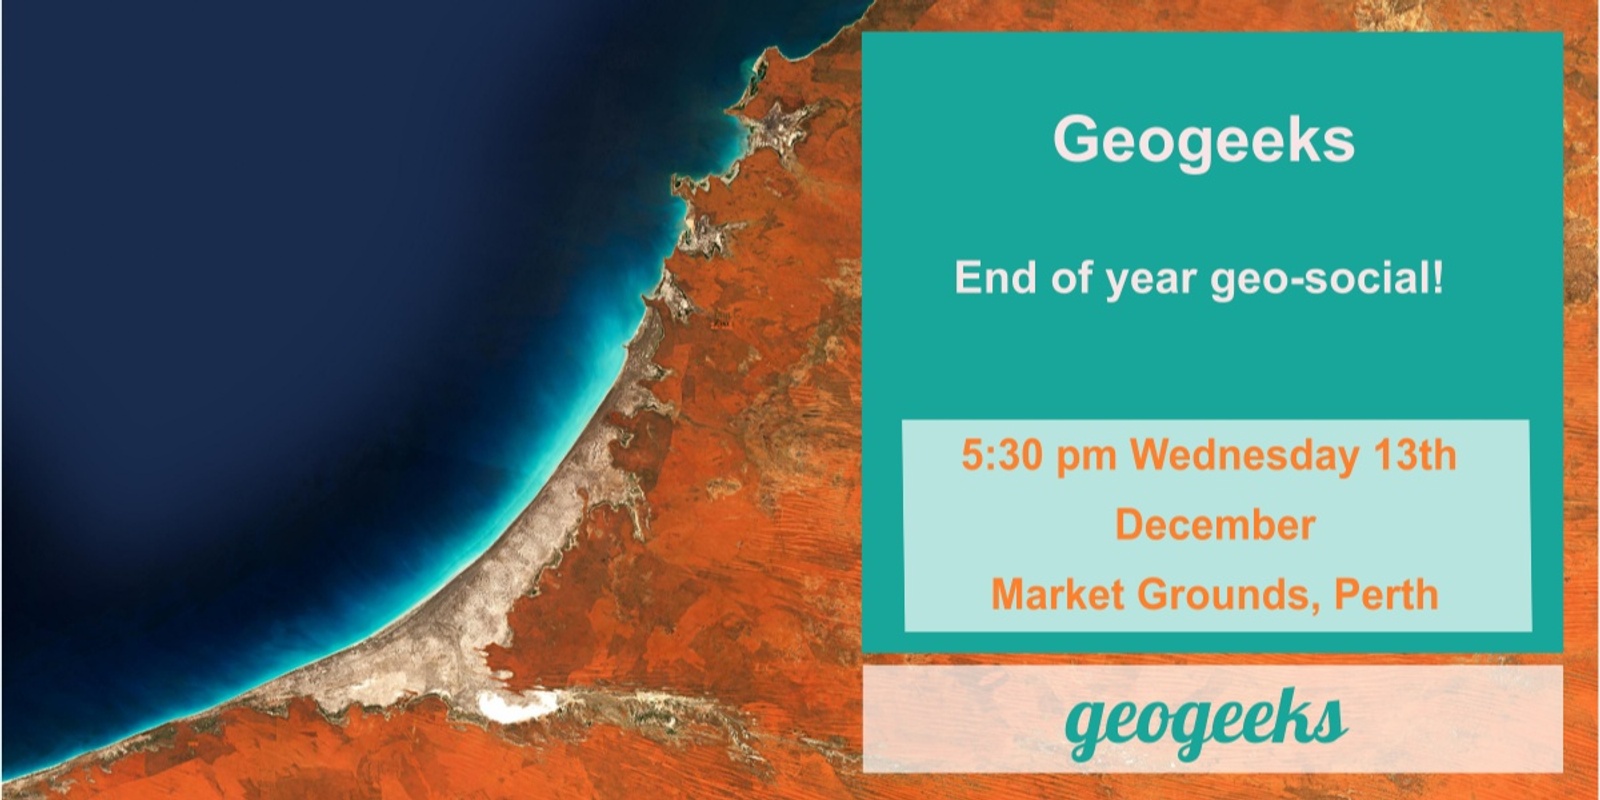 Banner image for Geogeeks Meetup: End of year geo-social